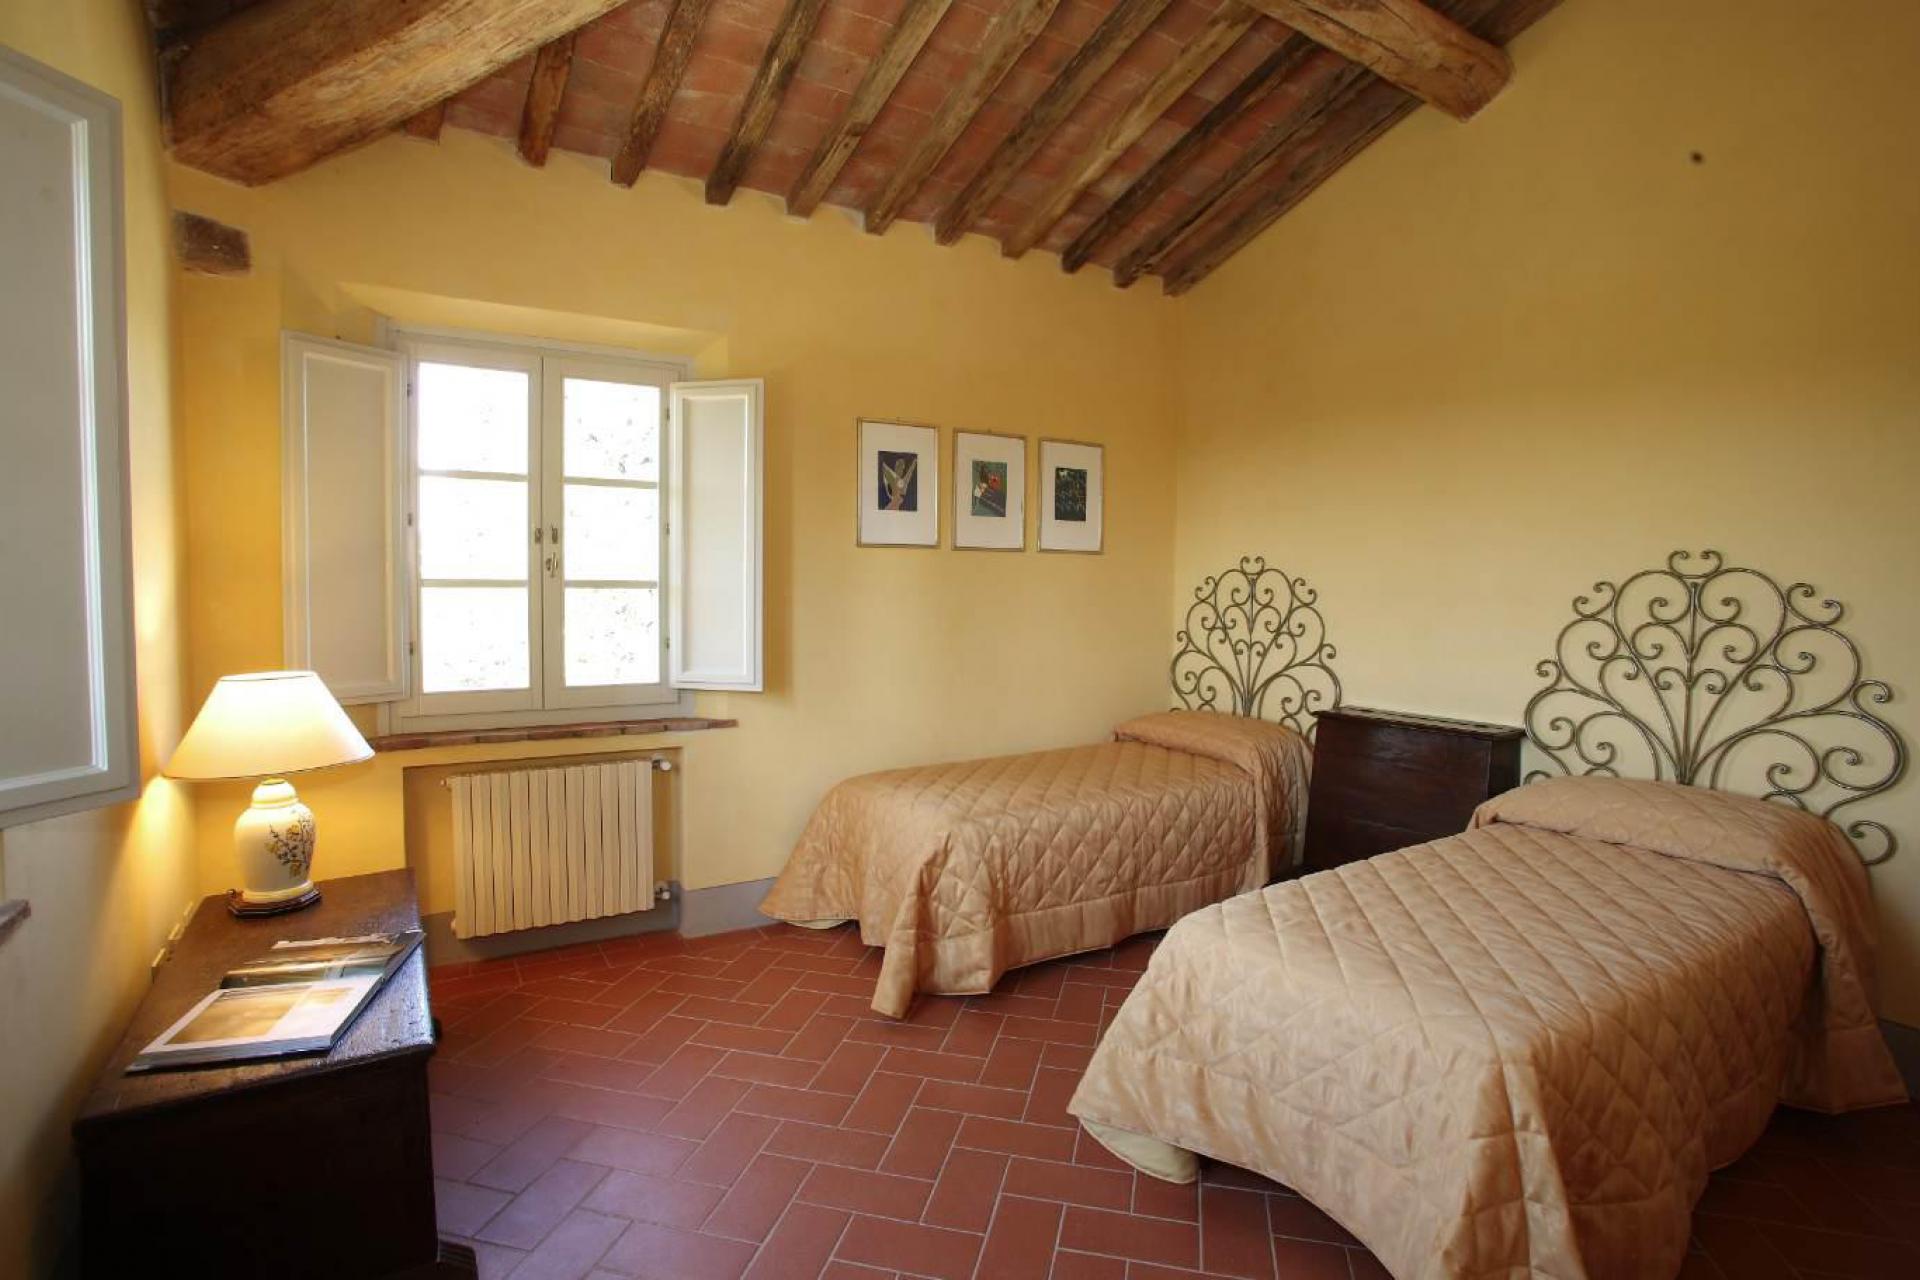 Hospitable agriturismo with beautiful apartments